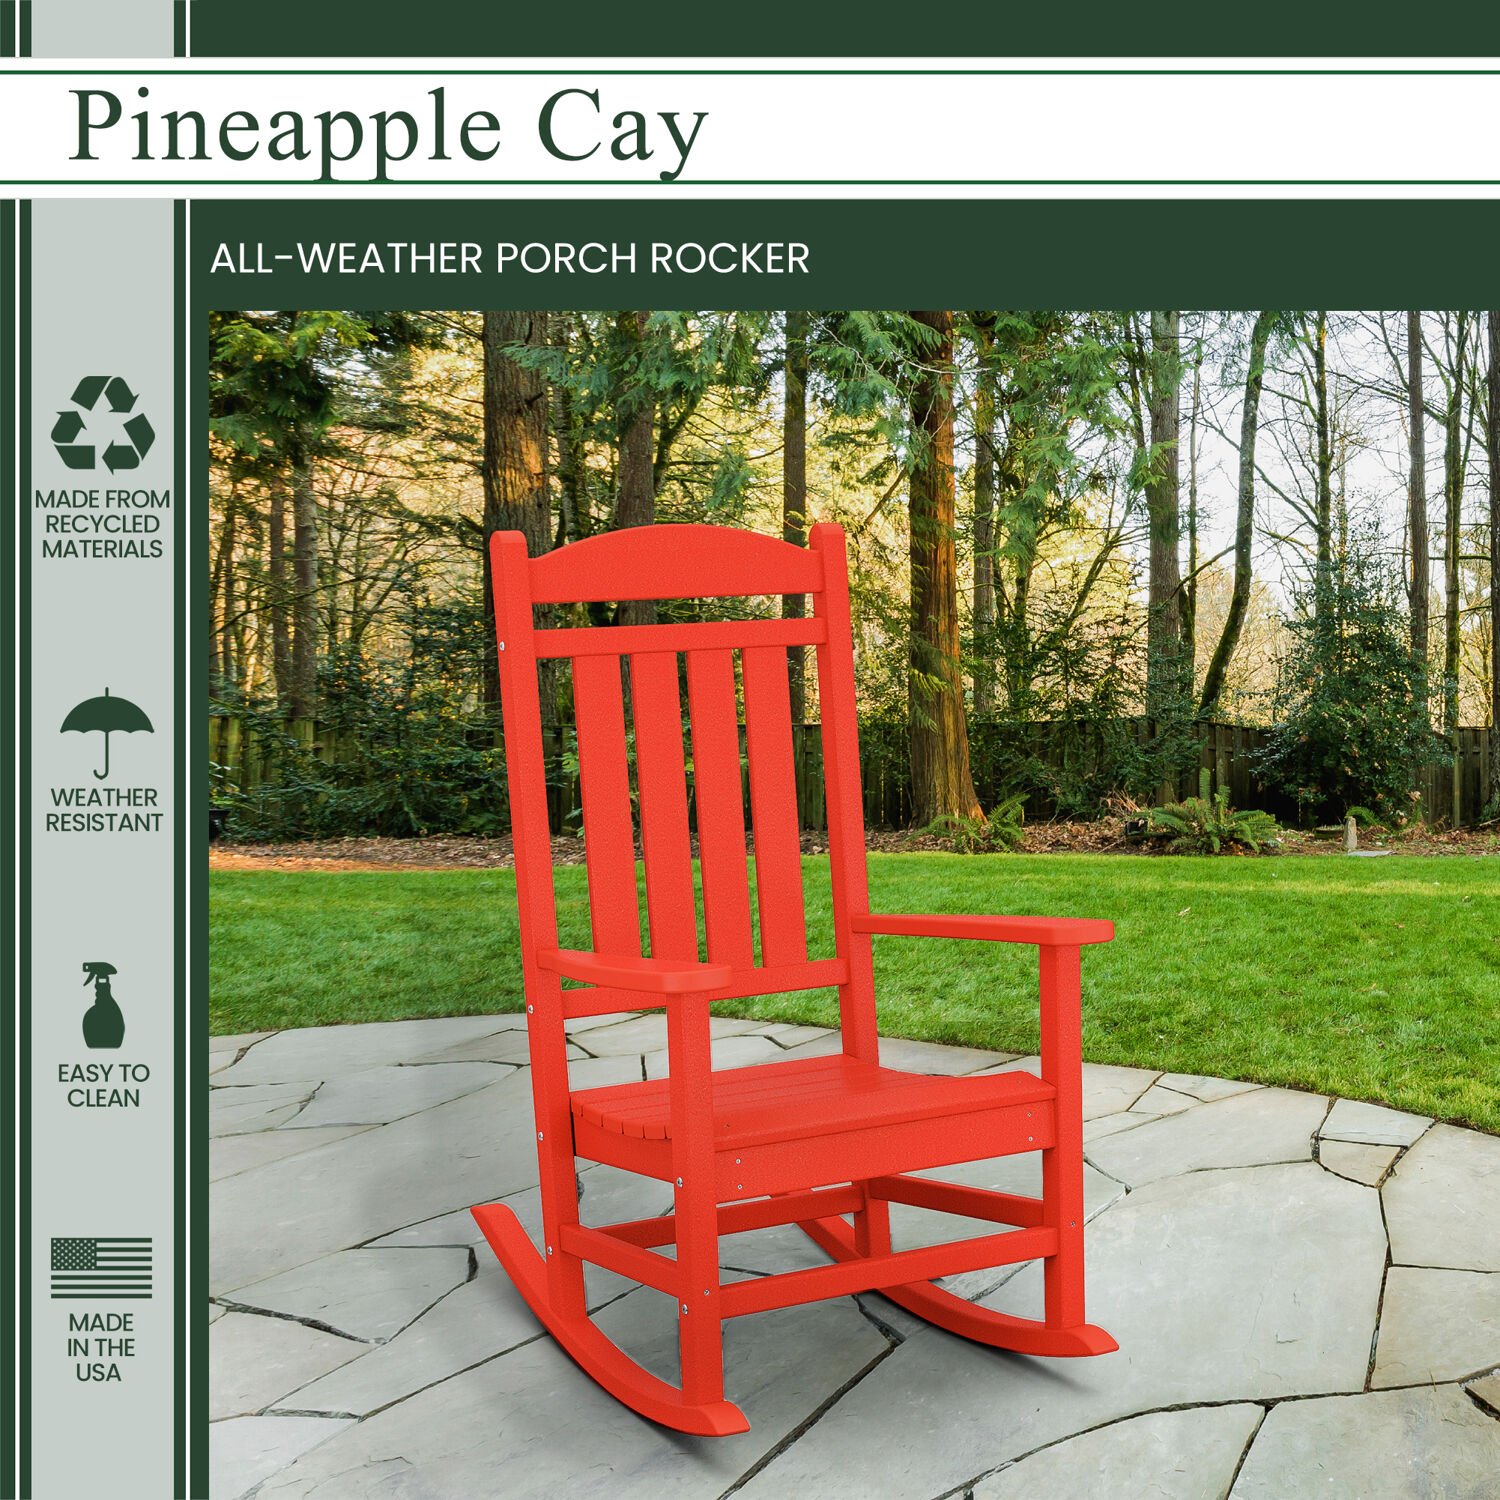 Hanover Pineapple Cay All-Weather Outdoor Patio Porch Rocker, Eco-Friendly, Recycled Material, - HVR100SR - image 2 of 5